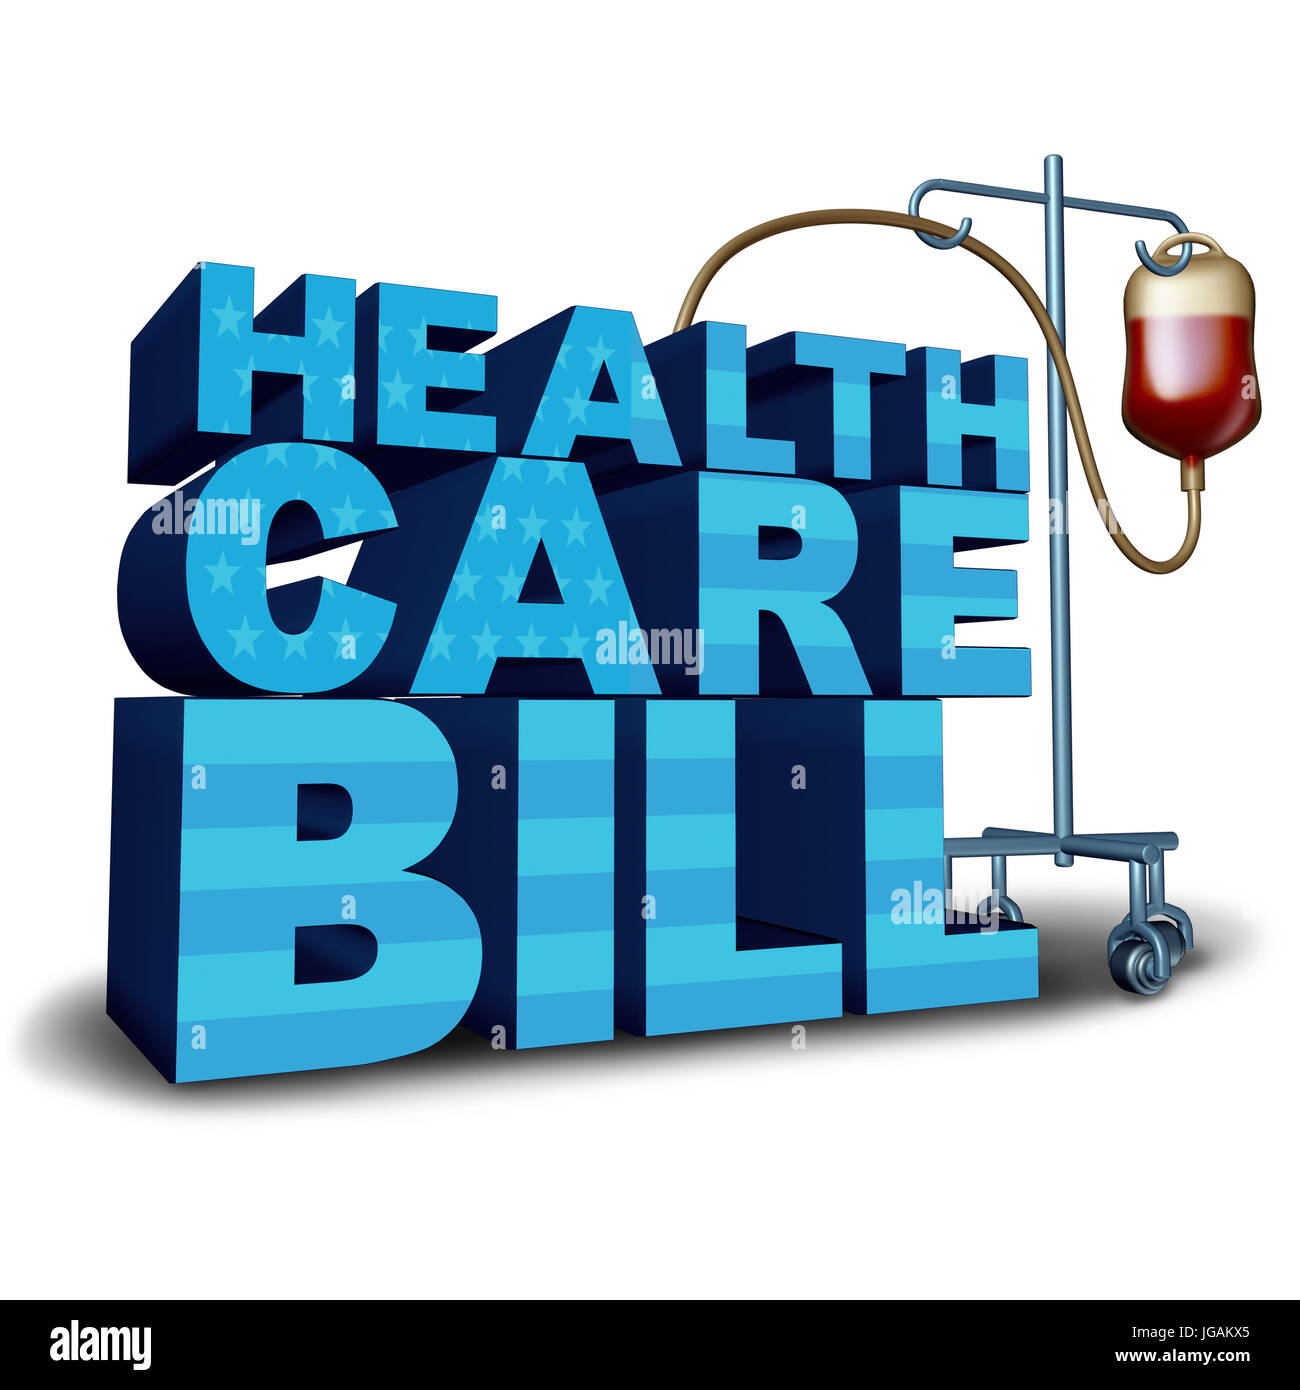 United States health care bill concept and American medical insurance legislation symbol as text with a hospital intravenous blood bag. Stock Photo